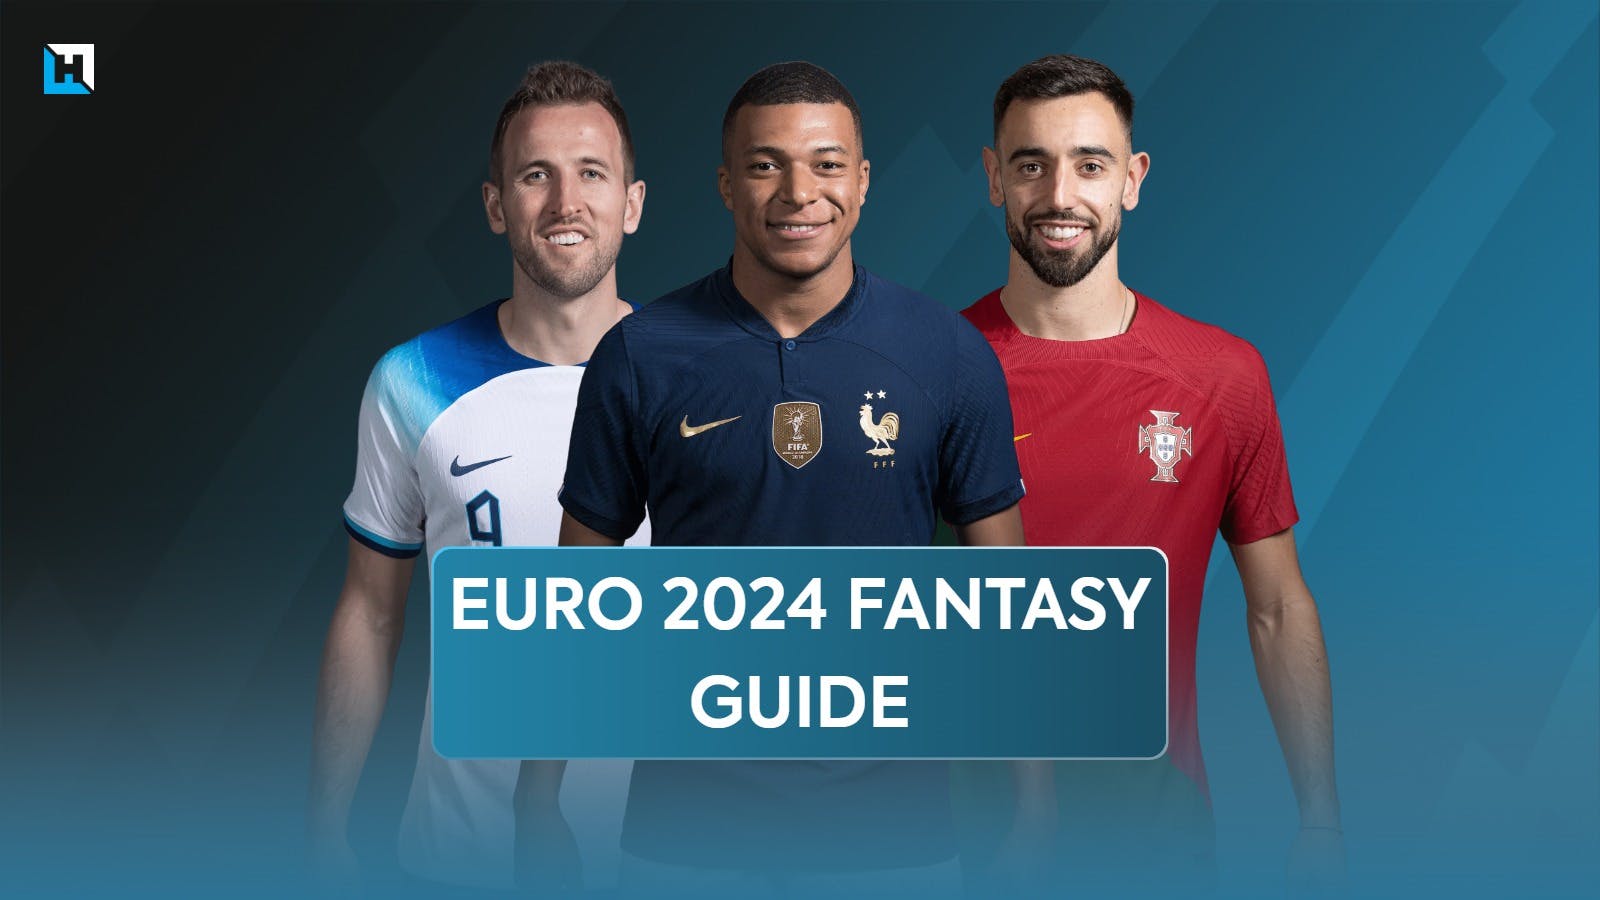 UEFA Euro 2024 Fantasy: How to play, teams to target and player stats